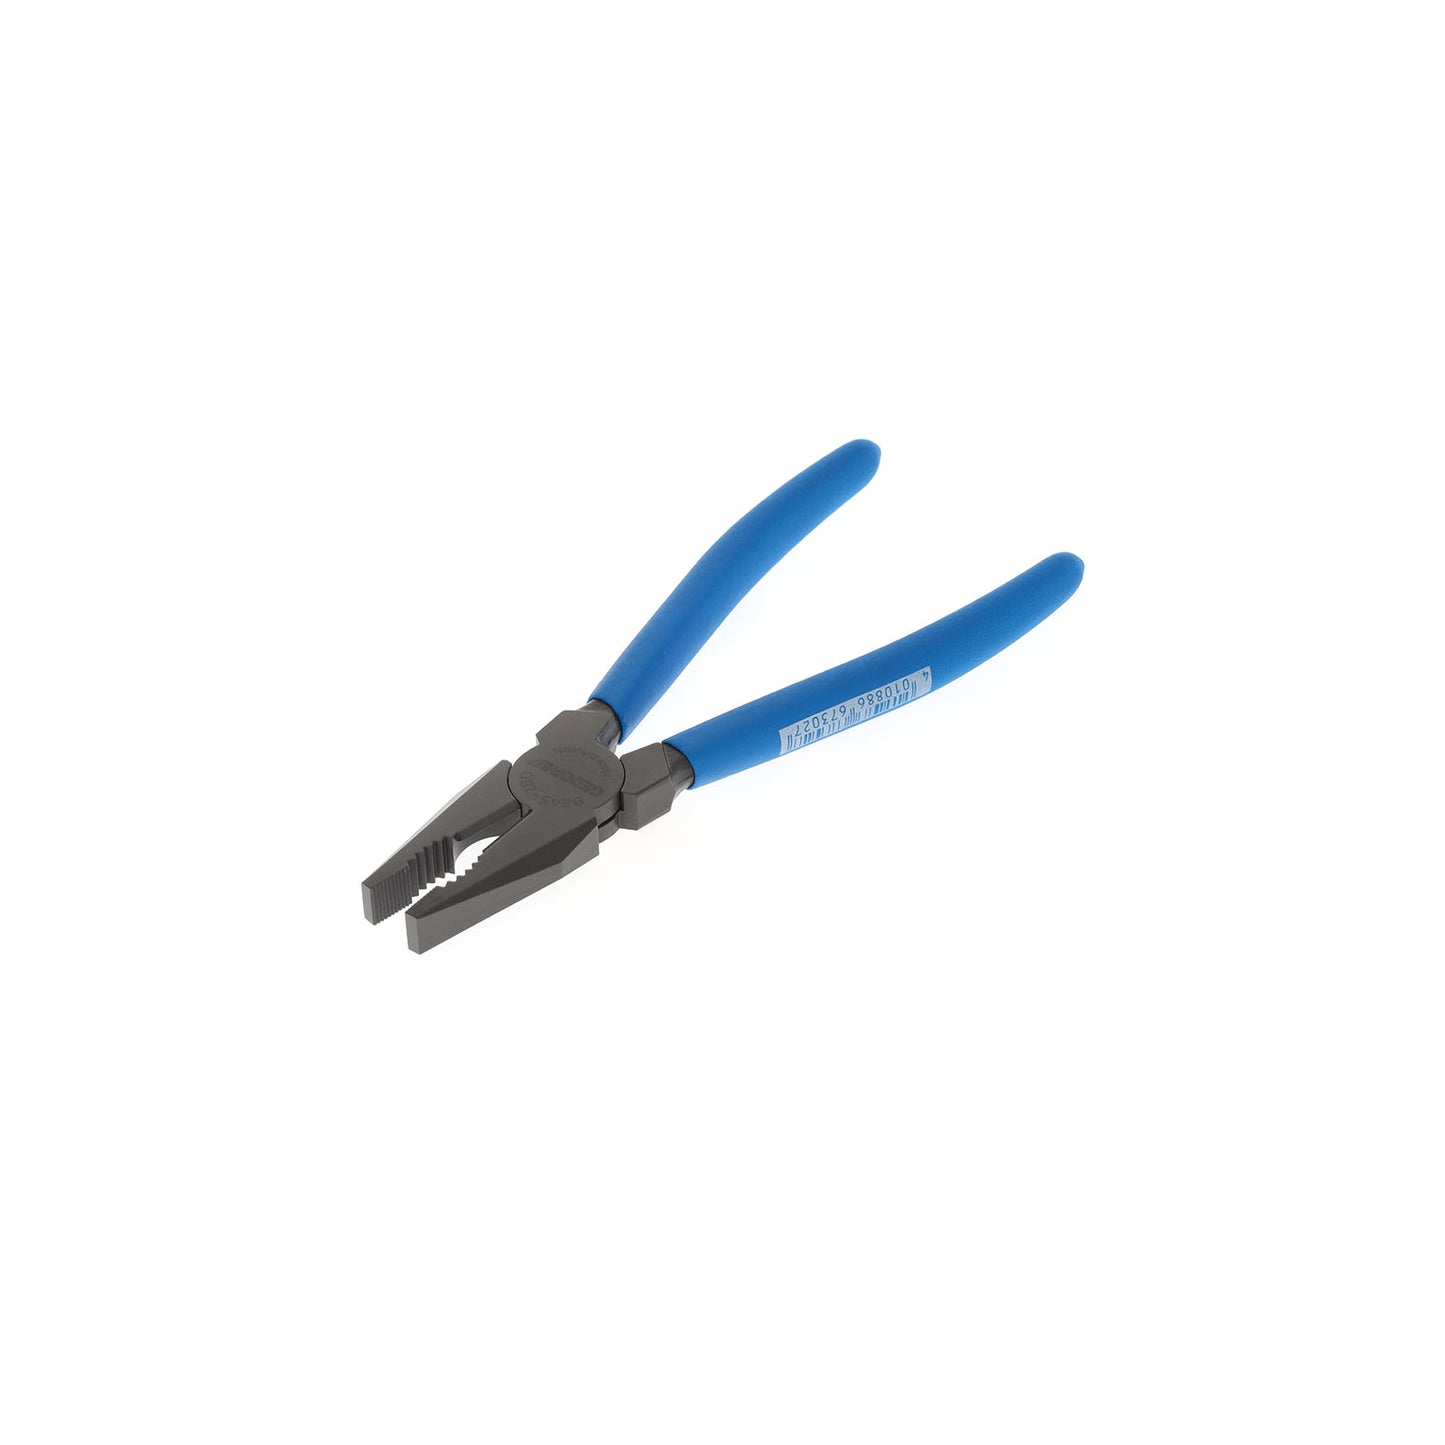 GEDORE 8245-180 TL - Universal pliers 180 mm (6730210)